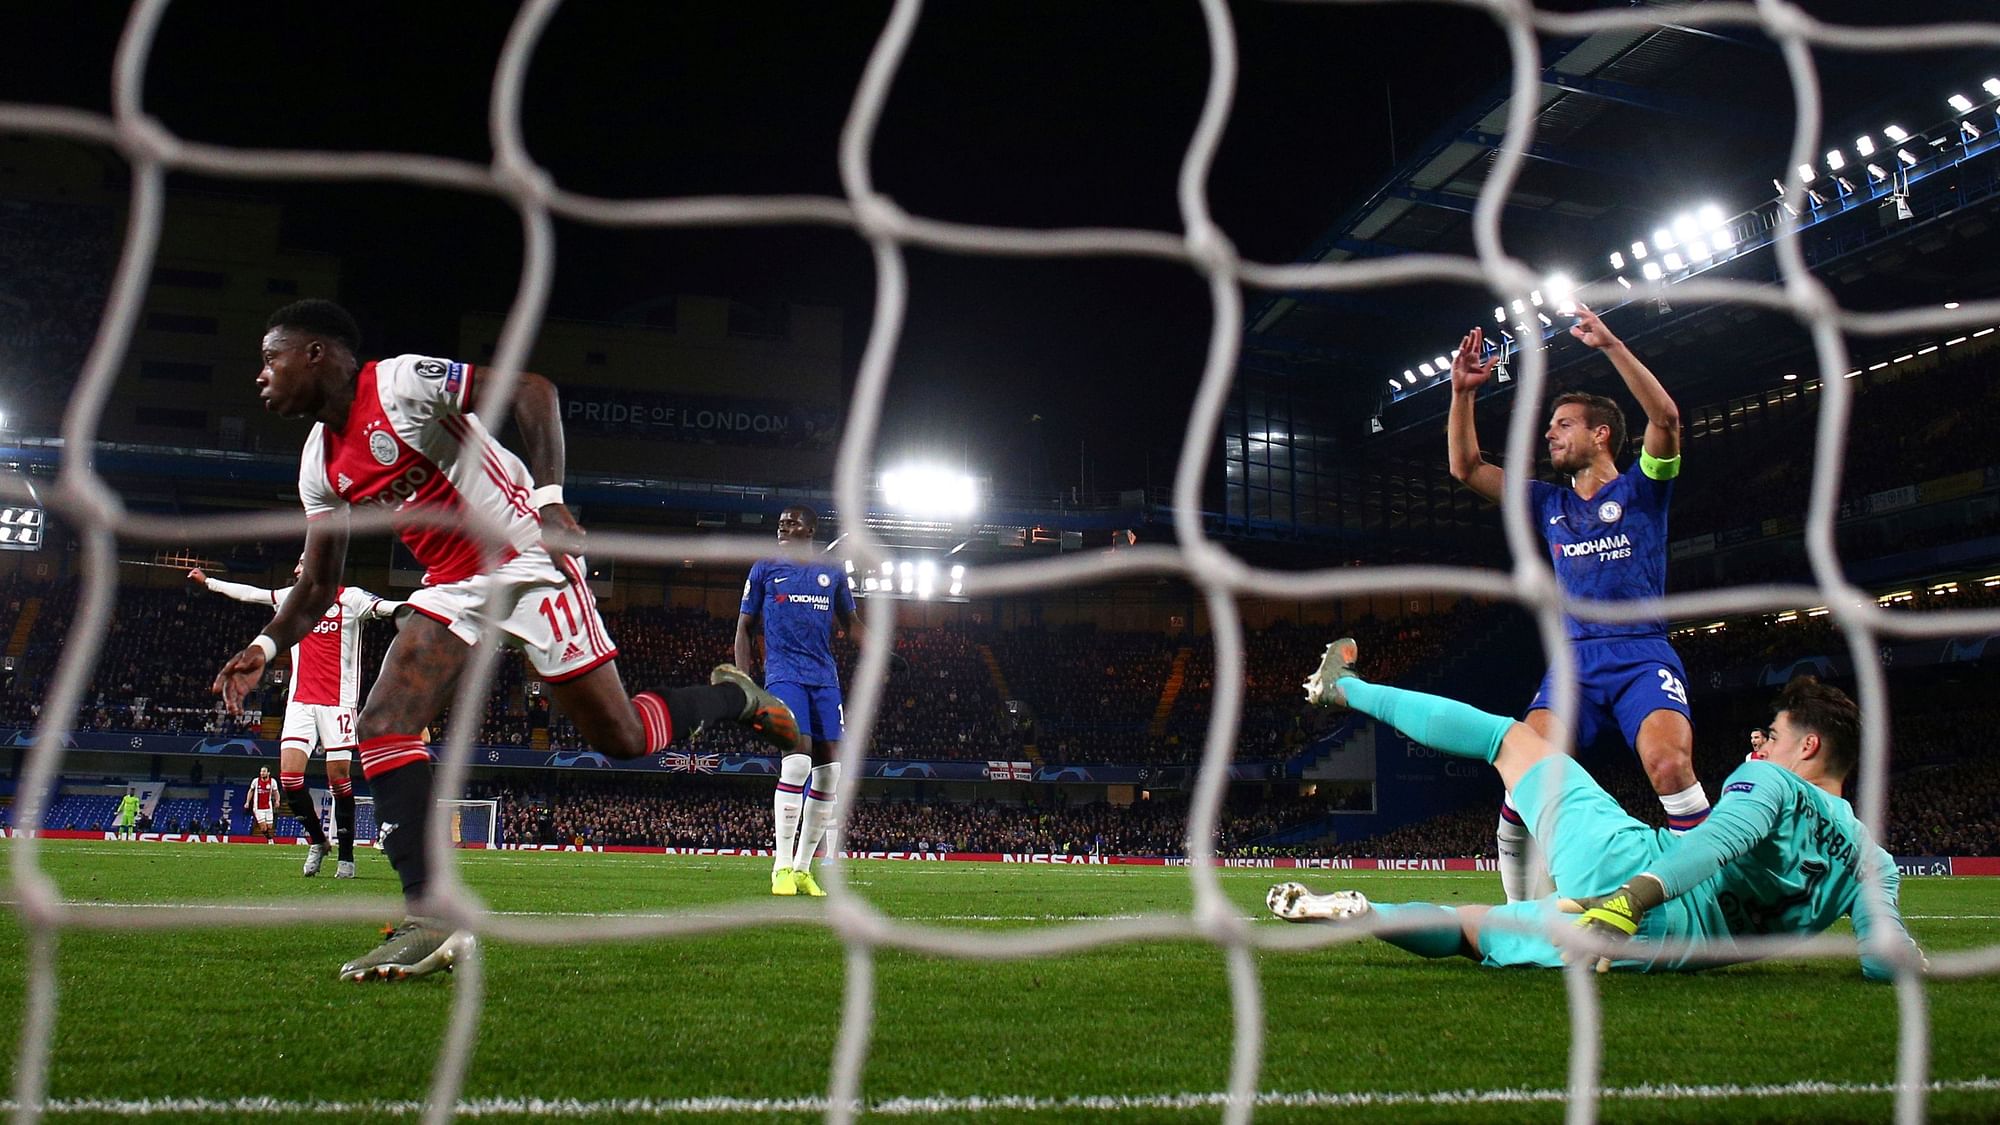 Chelsea overcame a three goal deficit to salvage a point in a 4-4 draw against Ajax.